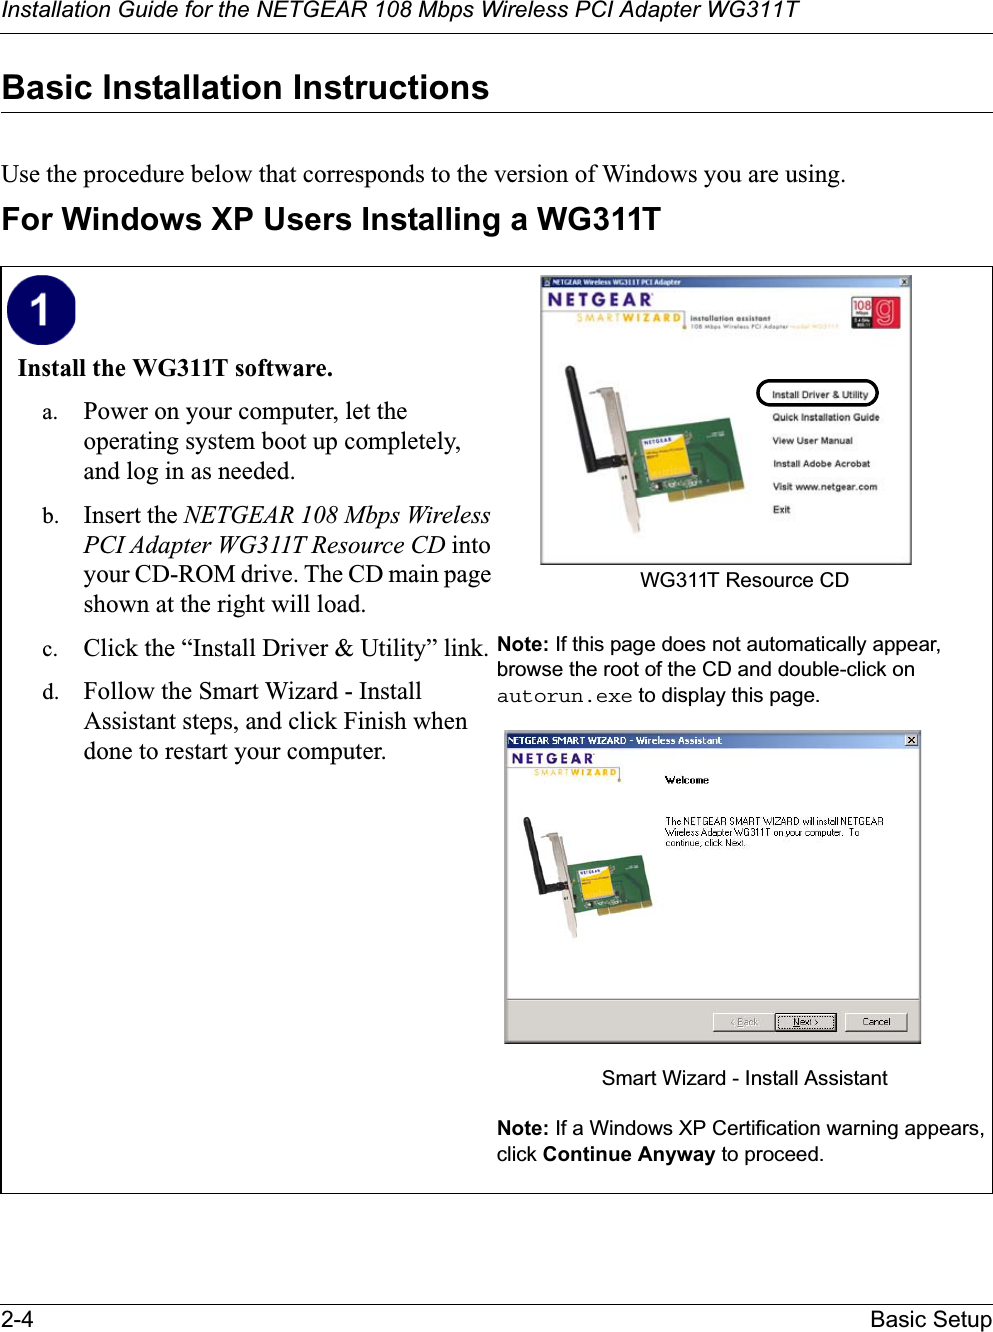 Installation Guide for the NETGEAR 108 Mbps Wireless PCI Adapter WG311T2-4 Basic SetupBasic Installation Instructions Use the procedure below that corresponds to the version of Windows you are using.For Windows XP Users Installing a WG311TInstall the WG311T software. a. Power on your computer, let the operating system boot up completely, and log in as needed.b. Insert the NETGEAR 108 Mbps Wireless PCI Adapter WG311T Resource CD into your CD-ROM drive. The CD main page shown at the right will load.c. Click the “Install Driver &amp; Utility” link.d. Follow the Smart Wizard - Install Assistant steps, and click Finish when done to restart your computer.WG311T Resource CDNote: If this page does not automatically appear, browse the root of the CD and double-click on autorun.exe to display this page.Smart Wizard - Install AssistantNote: If a Windows XP Certification warning appears, click Continue Anyway to proceed.